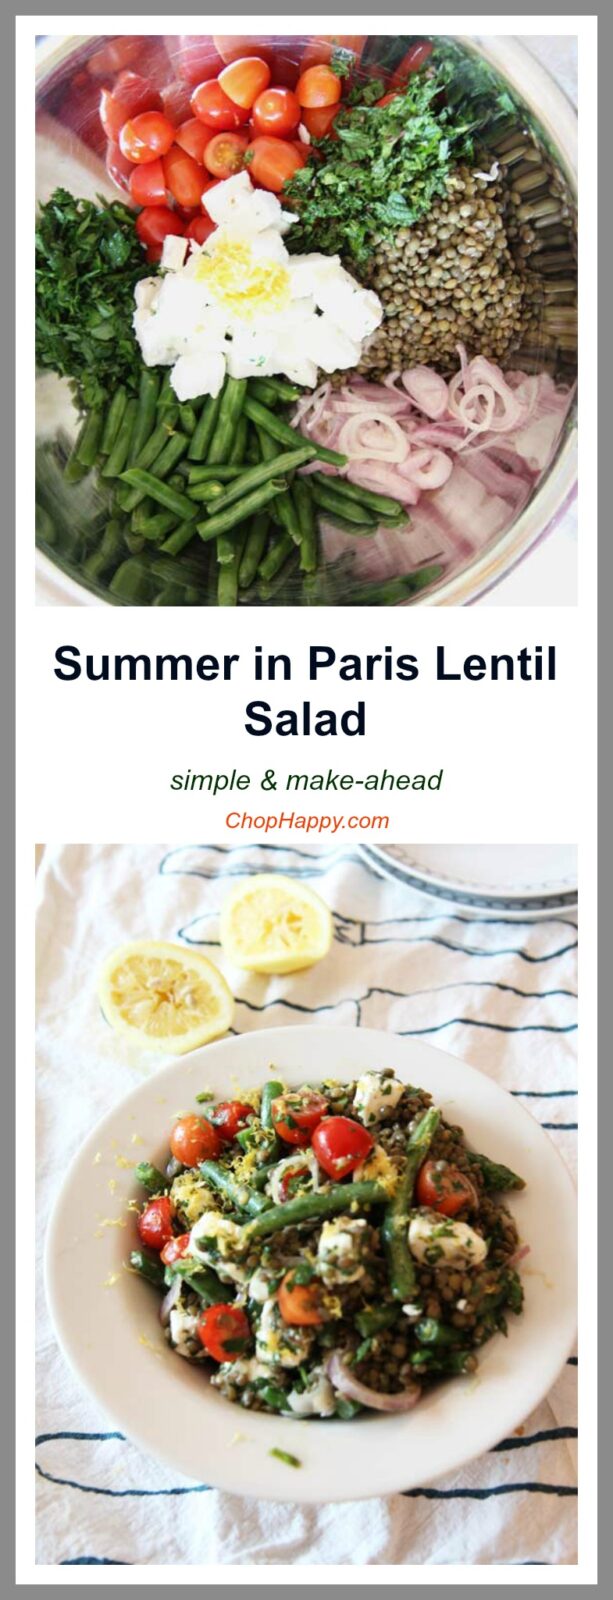 Summer in Paris Lentil Salad is an easy, quick recipe. Perfect is you do not have allot of time, or just want dinner for a couple of days. Excellent leftovers. ChopHappy.com